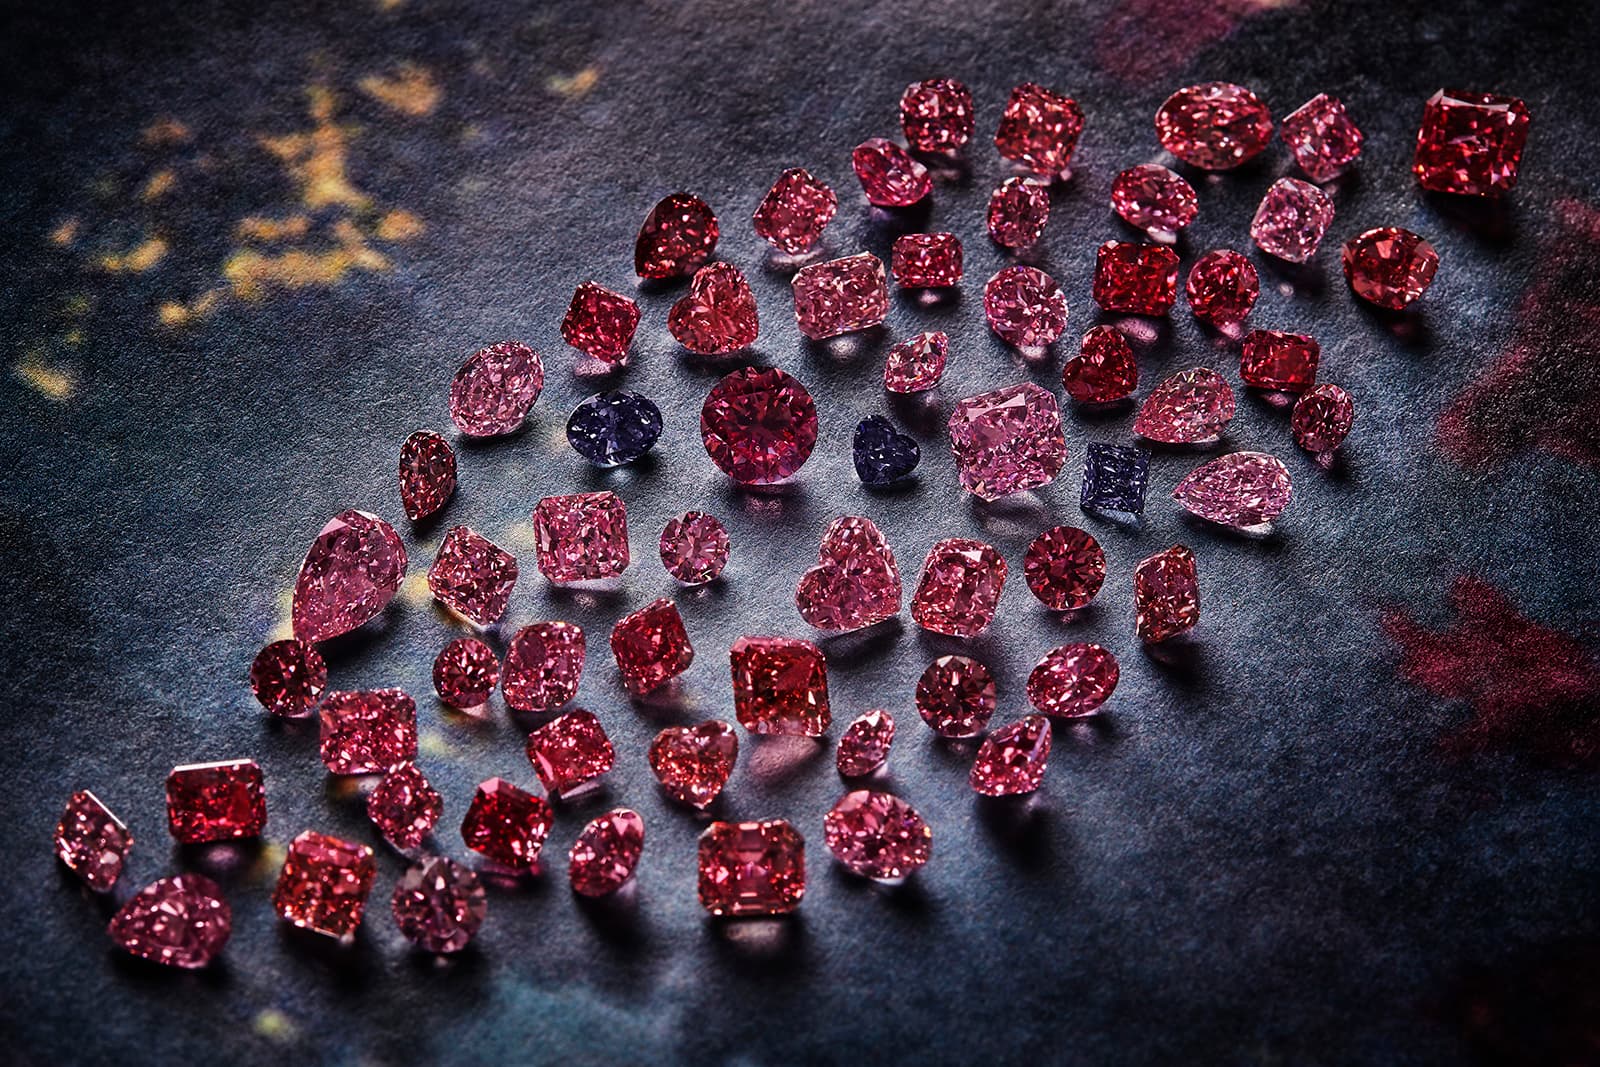 The Argyle Pink Diamonds Signature Tender 2020 collection includes a selection of pink, purple, violet and red diamonds